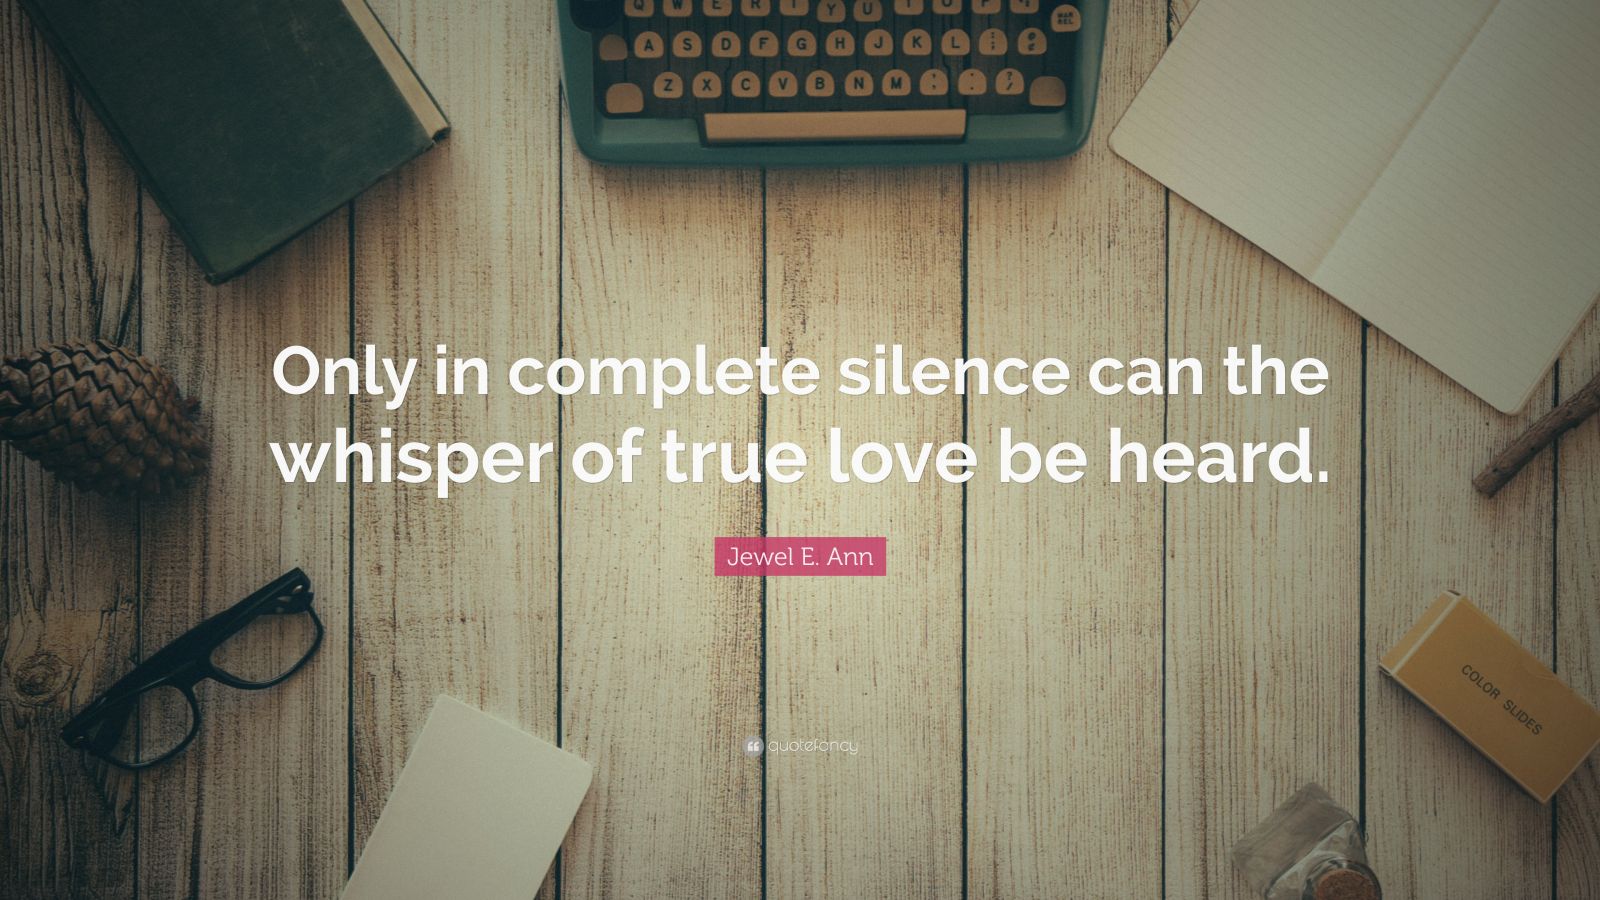 Jewel E. Ann Quote: “Only in complete silence can the whisper of